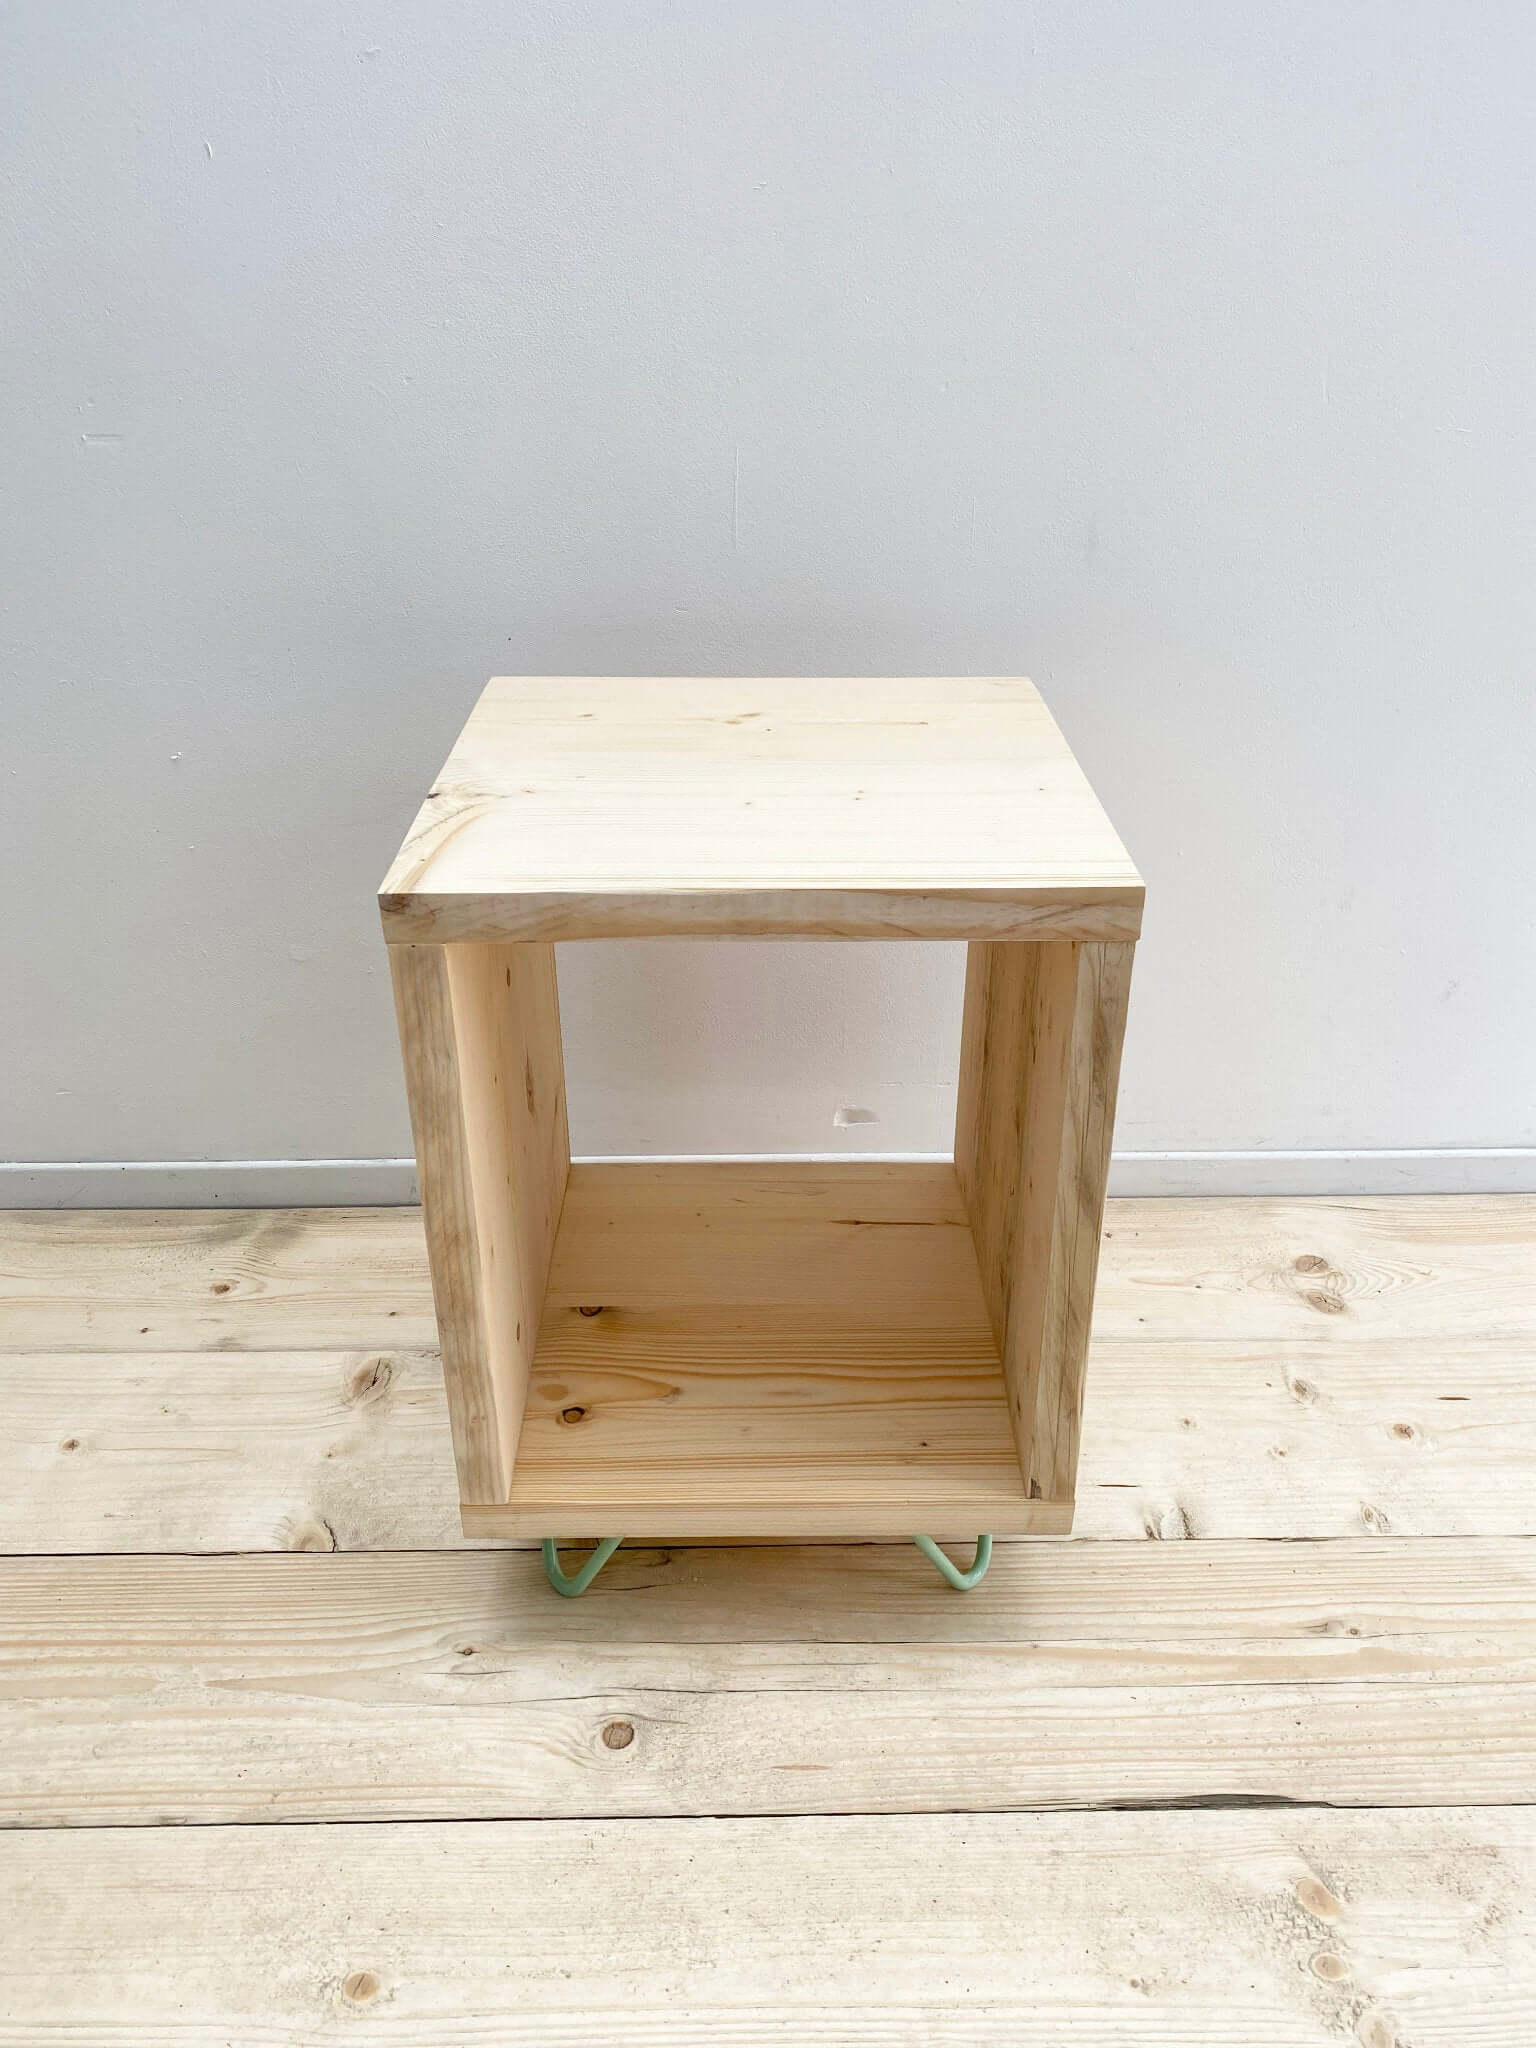 Reclaimed wood side table cube with hairpin legs.